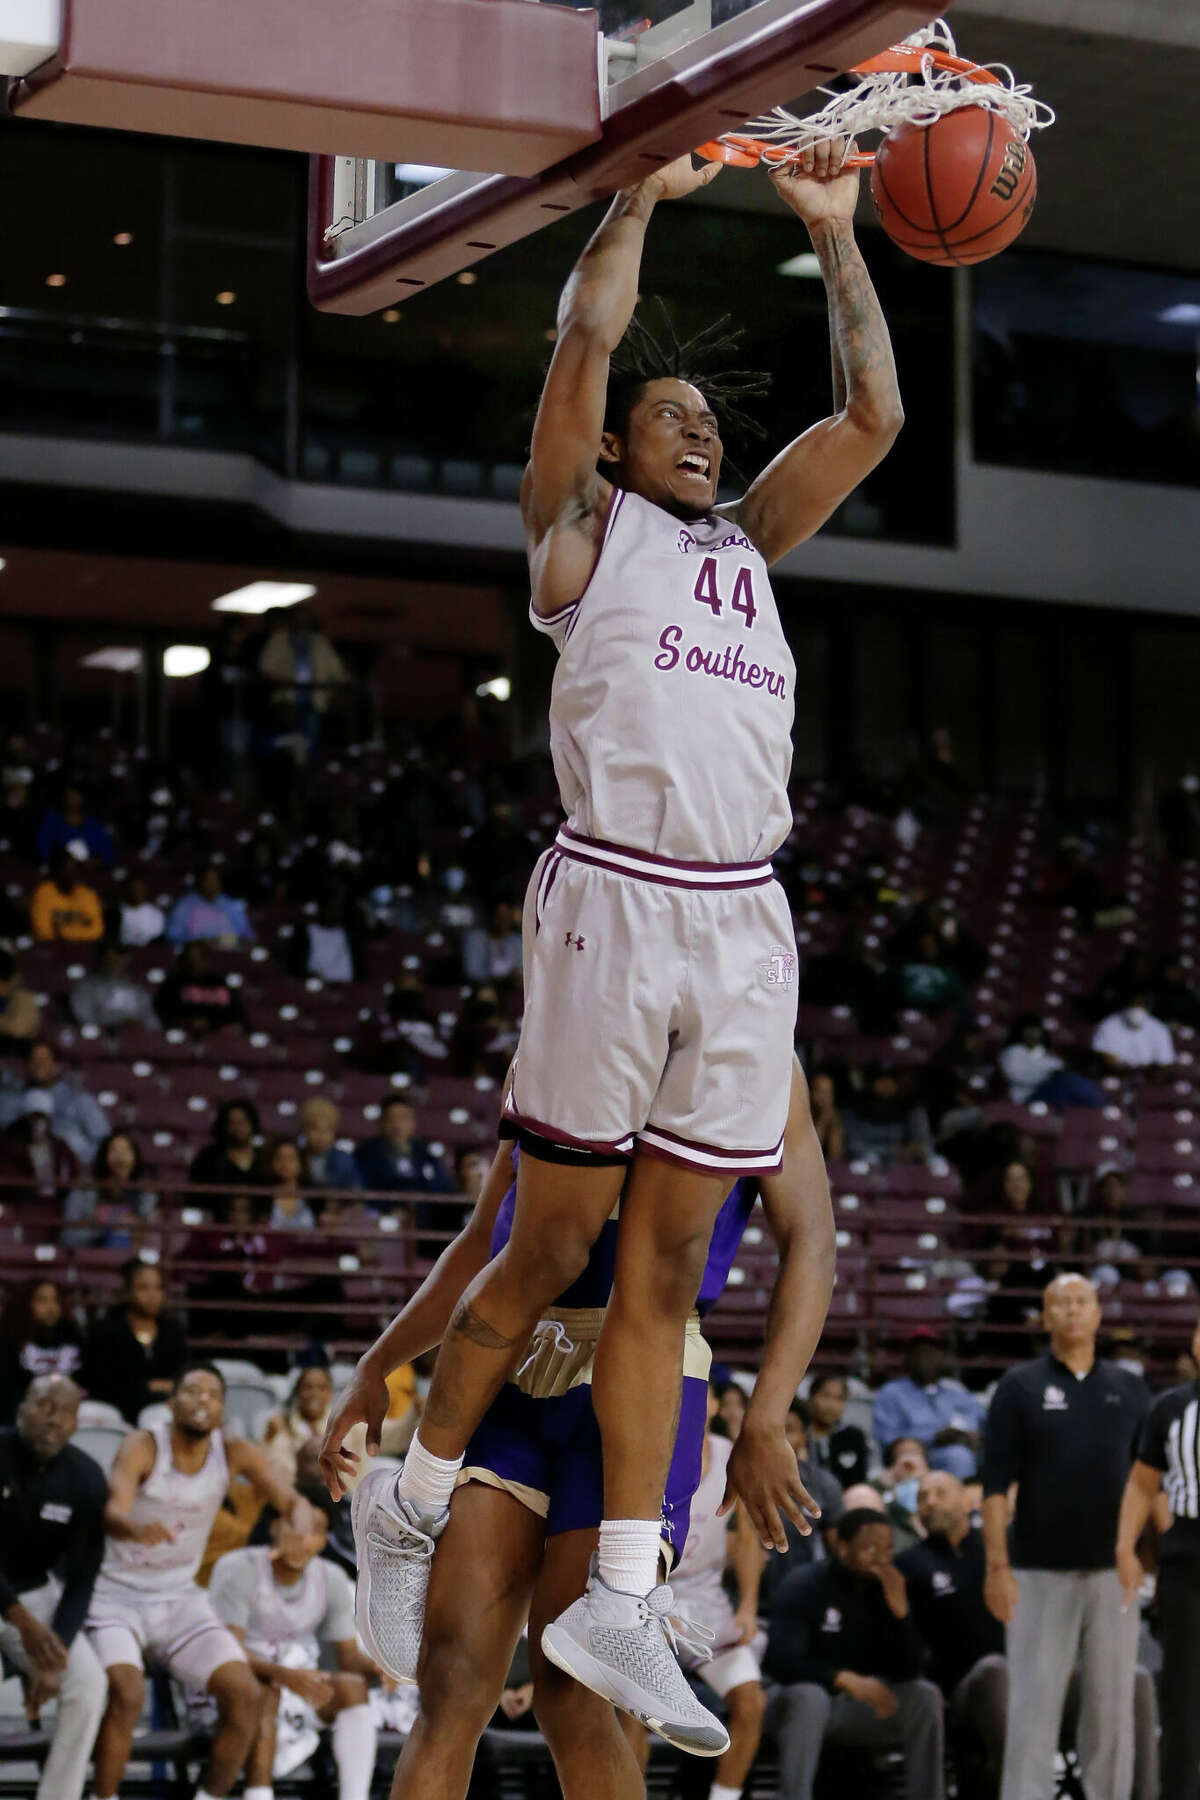 Texas Southern comes up short against Alcorn State